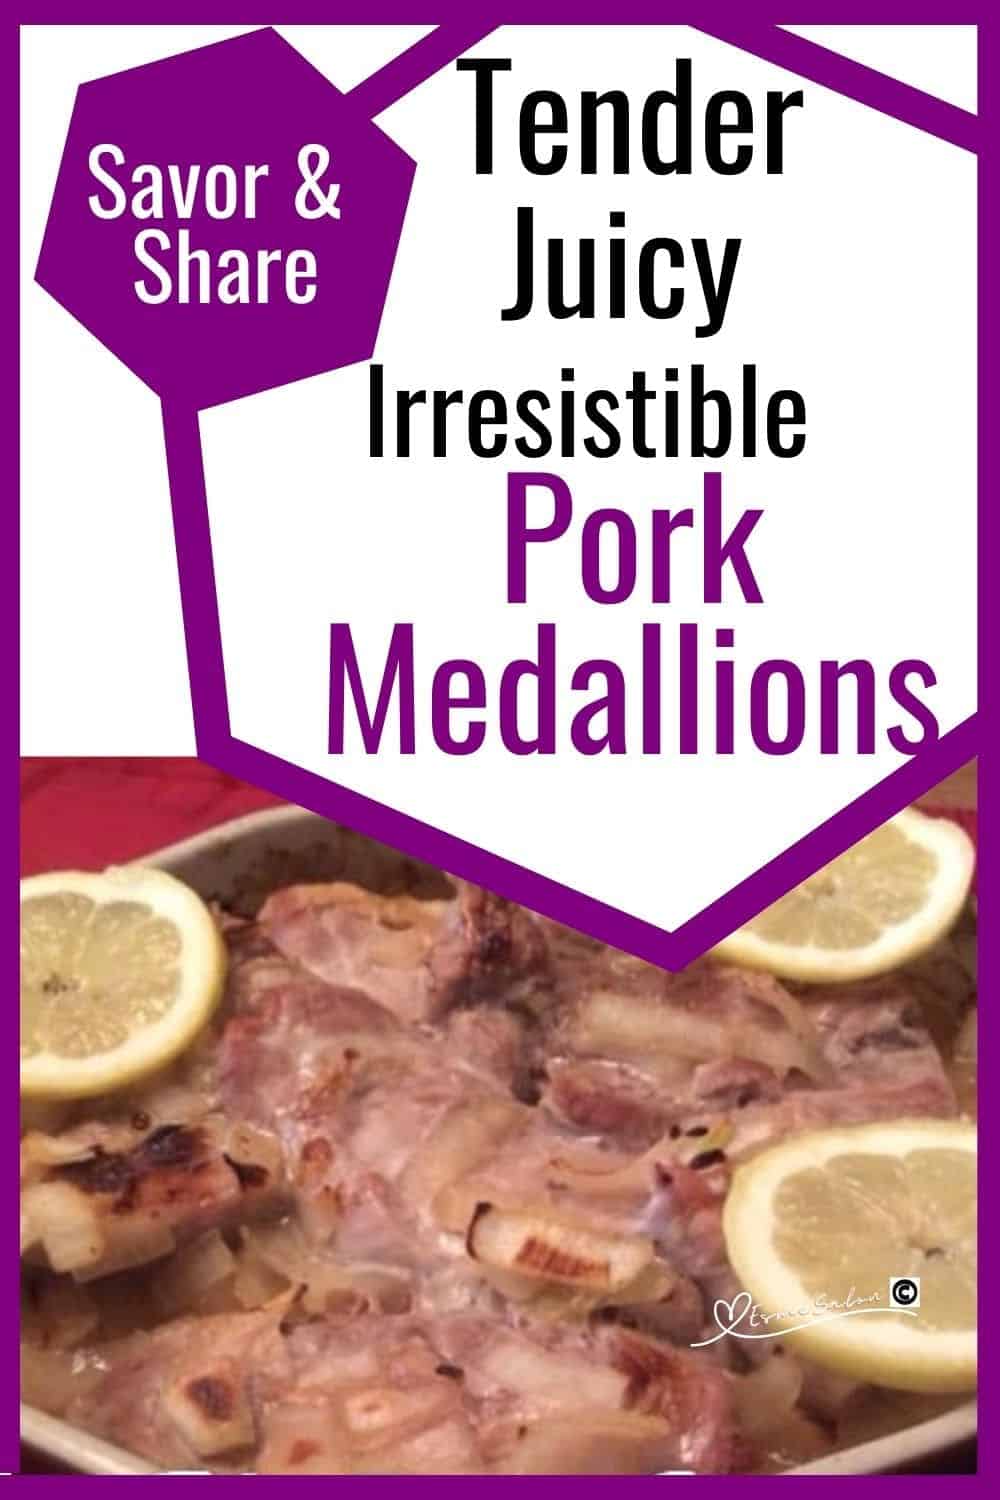 an image of pork medallions in broth cooked in the oven and served with slices of lemon